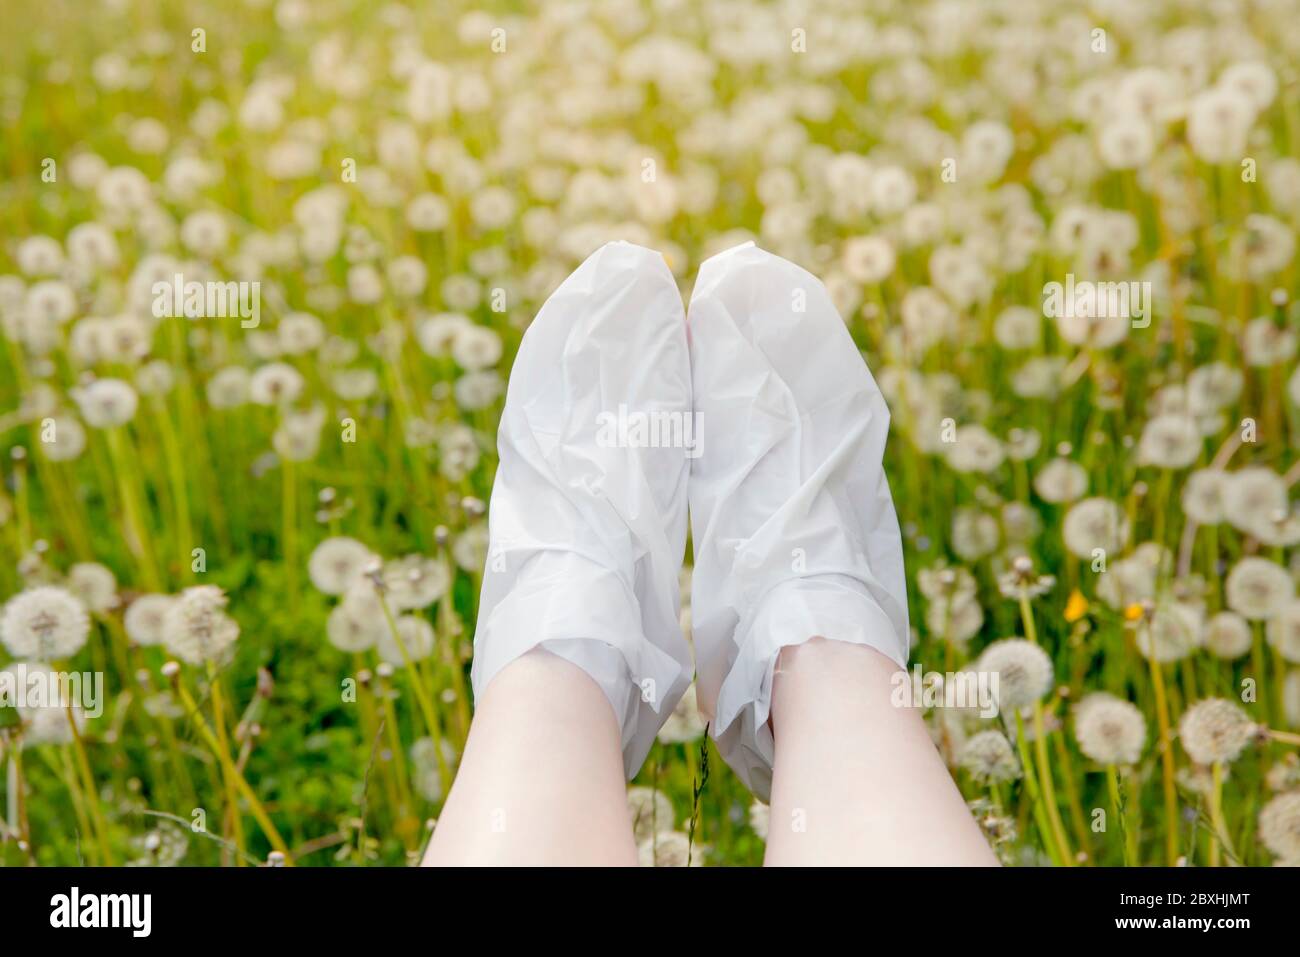 Moisturizing foot mask for dry heels feet. Woman wearing one time moisturizing foot mask socks outdoors with soft dandelion meadow on background. Stock Photo